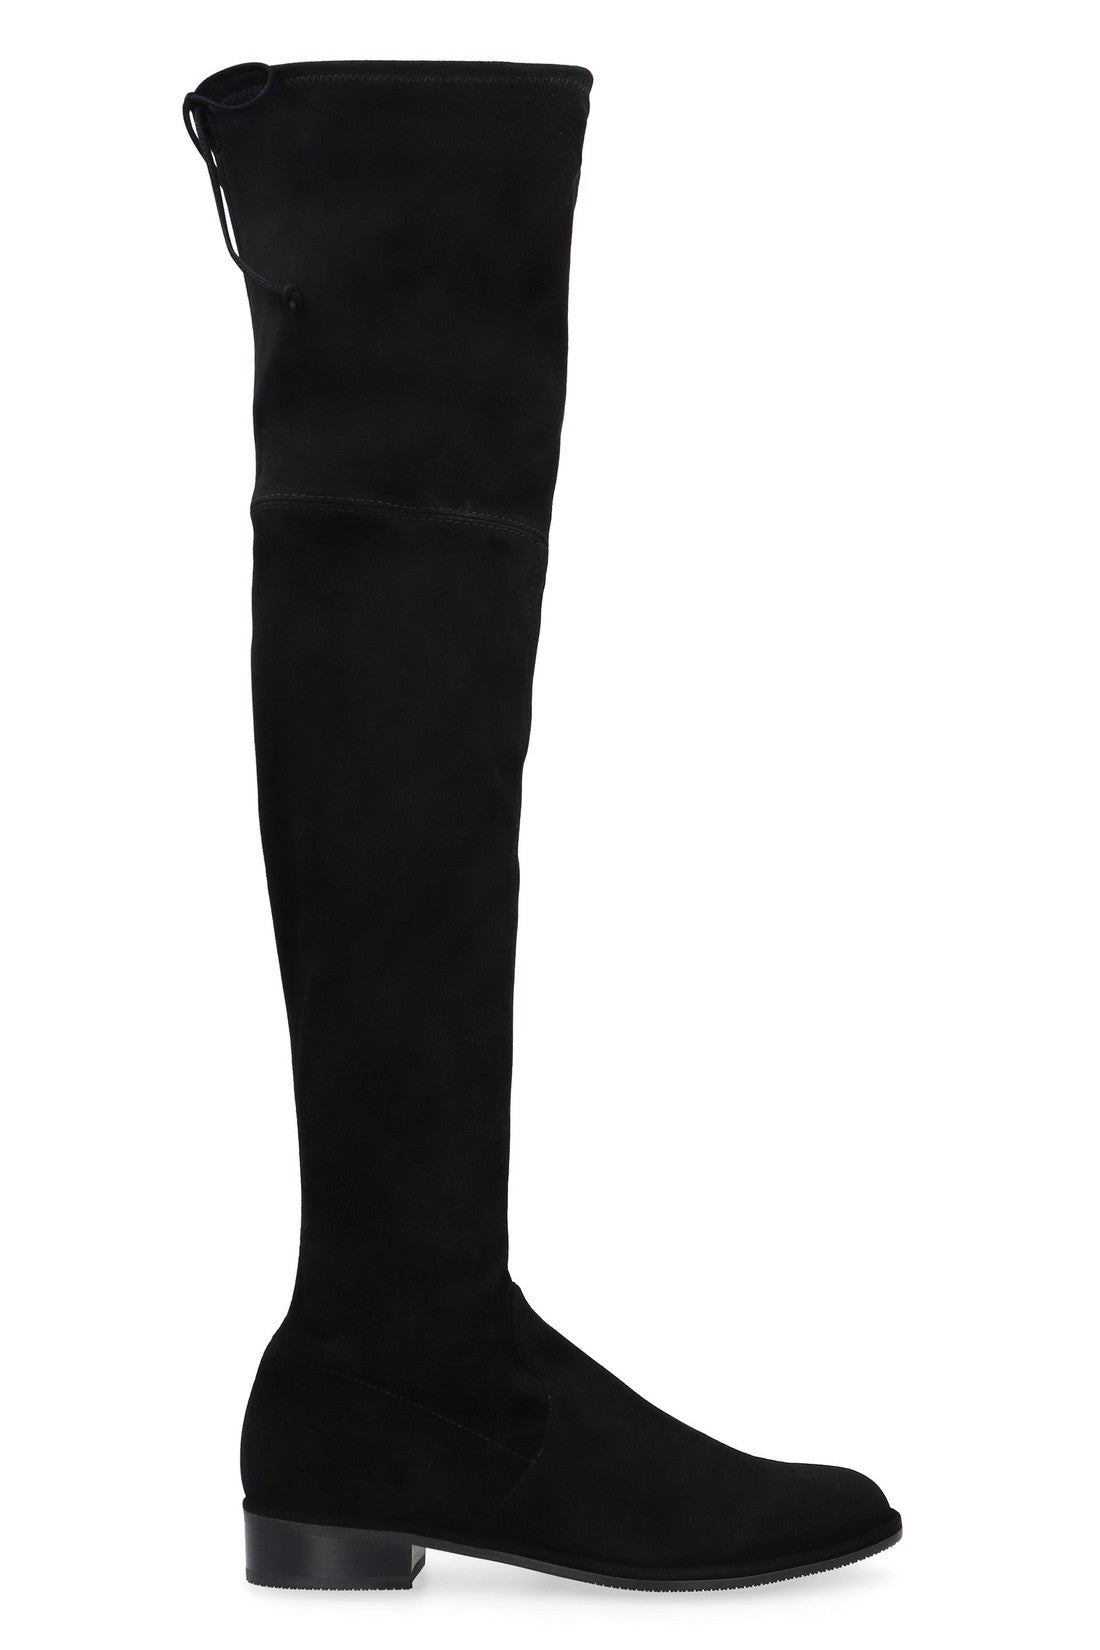 Stuart Weitzman-OUTLET-SALE-Lowland Stretch suede over the knee boots-ARCHIVIST